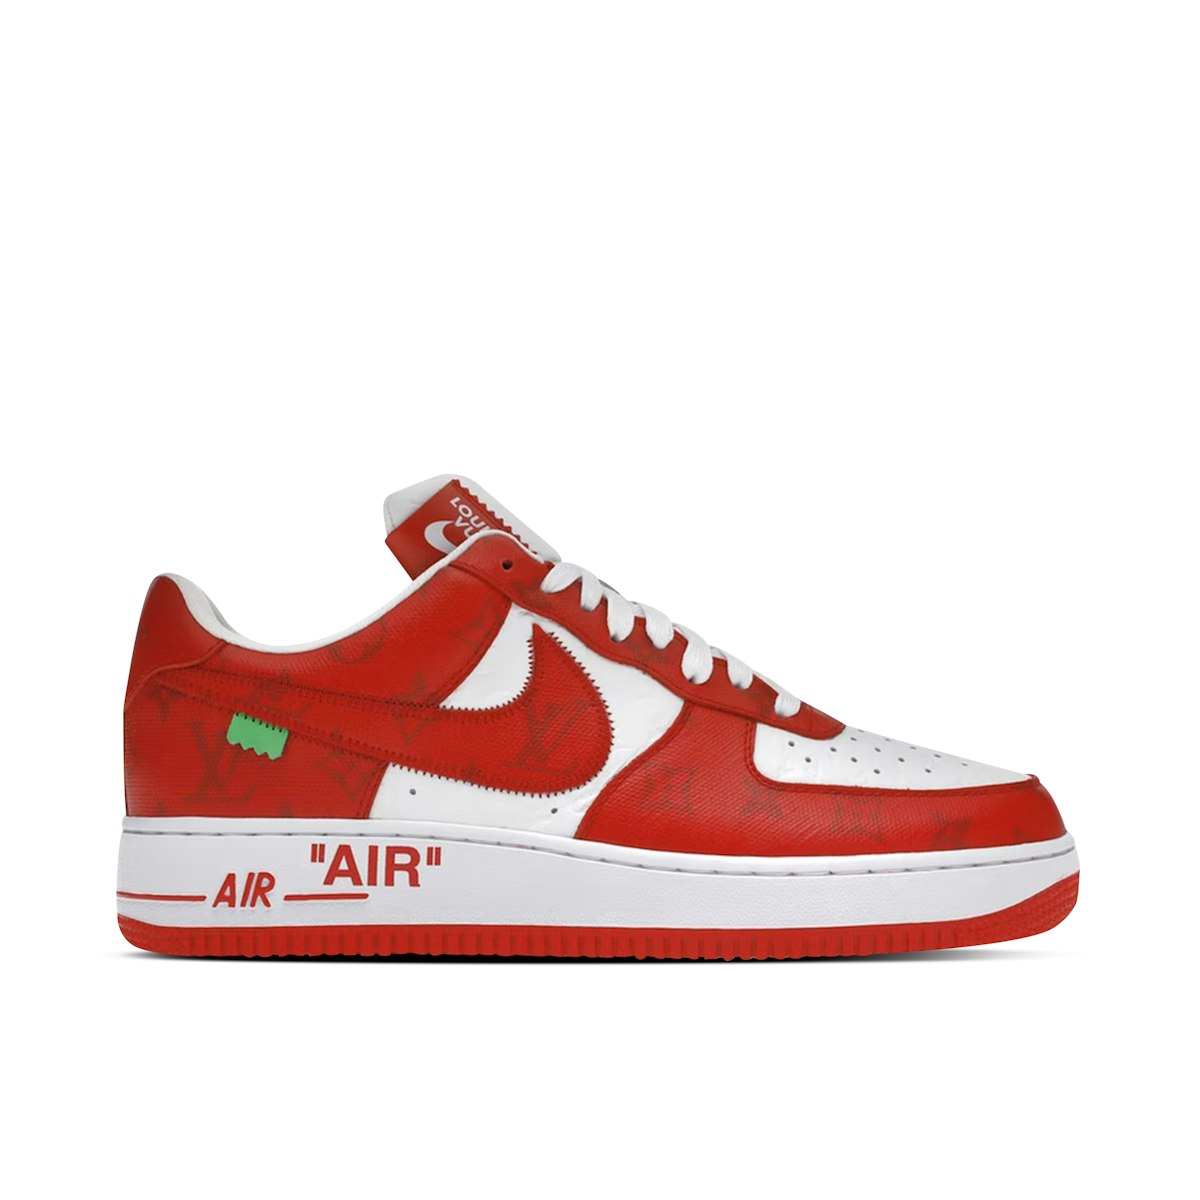 LOUIS VUITTON LV NIKE AIR FORCE 1 LOW AF1 VIRGIL ABLOH WHITE RED NEW SALE SNEAKERS  SHOES BOX MEN SIZE 9.5 43 A9 for Sale in Miami, FL - OfferUp